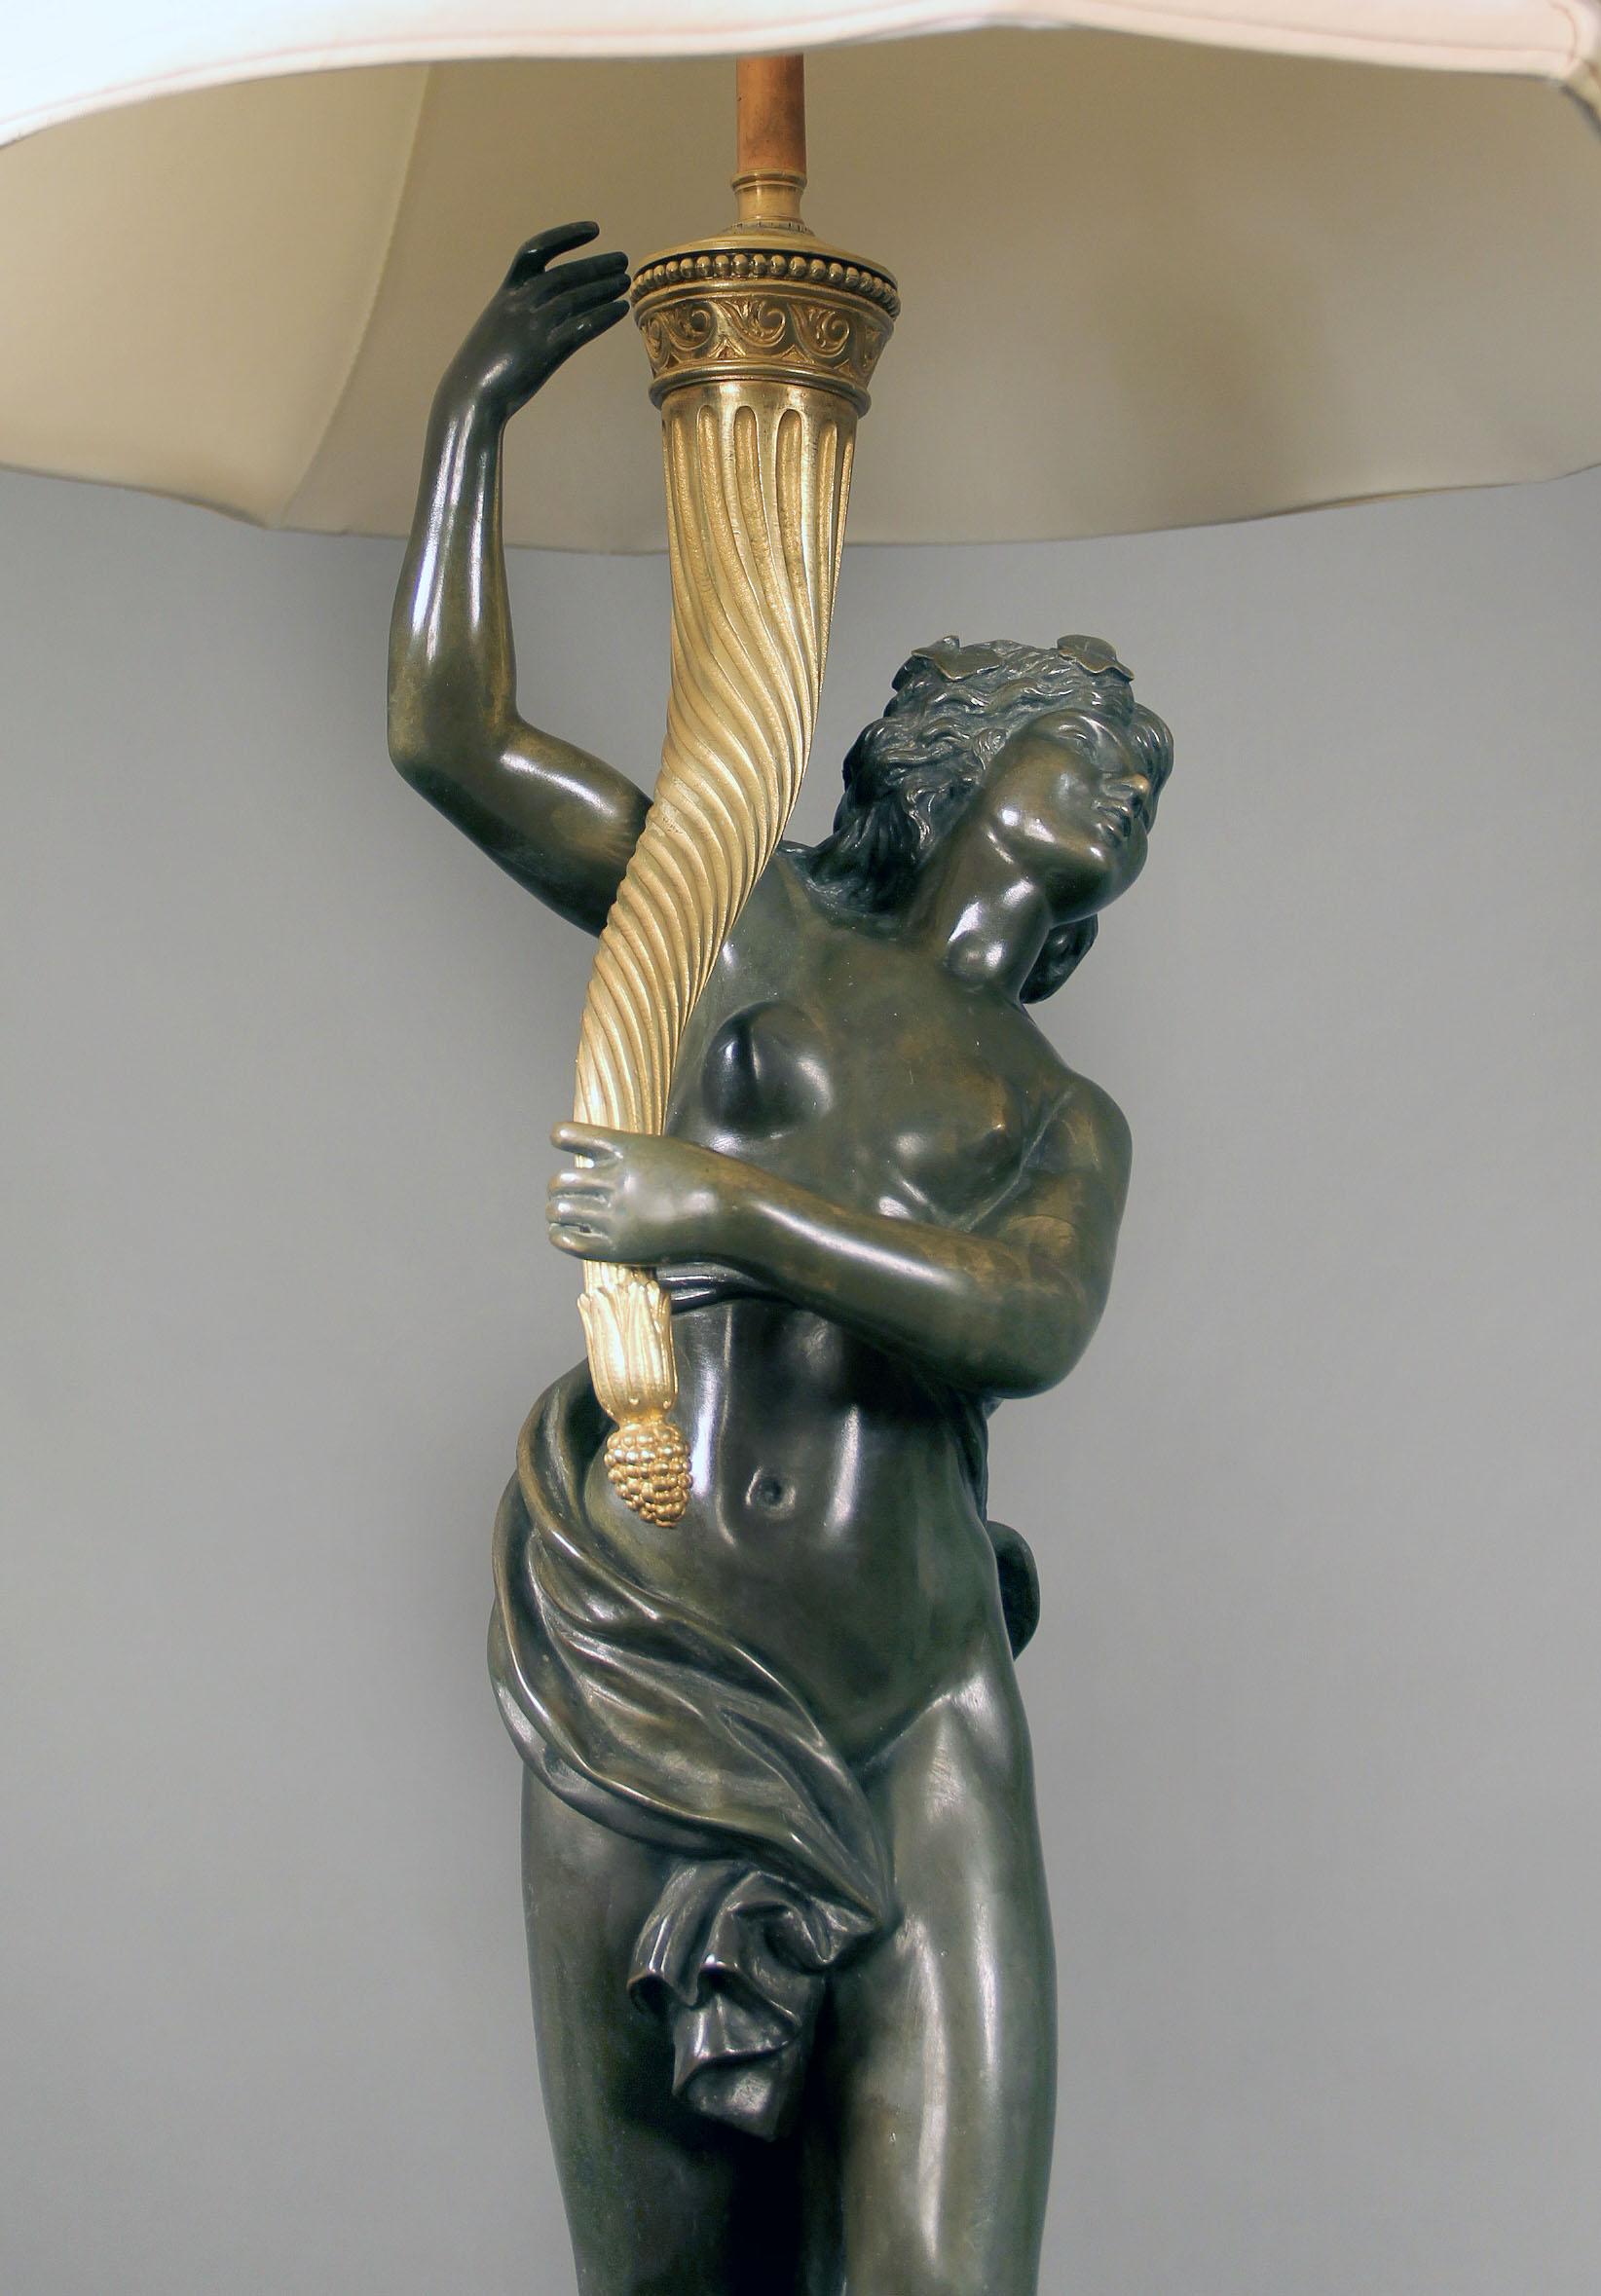 A late 19th century two-tone bronze lamp

After Clodion

Cast as a female figure from a bacchanale upholding a cornucopia lamp, on a bronze-mounted circular marble base. 

Claude Michael Clodion, [1738-1814], was the son-in-law of sculptor